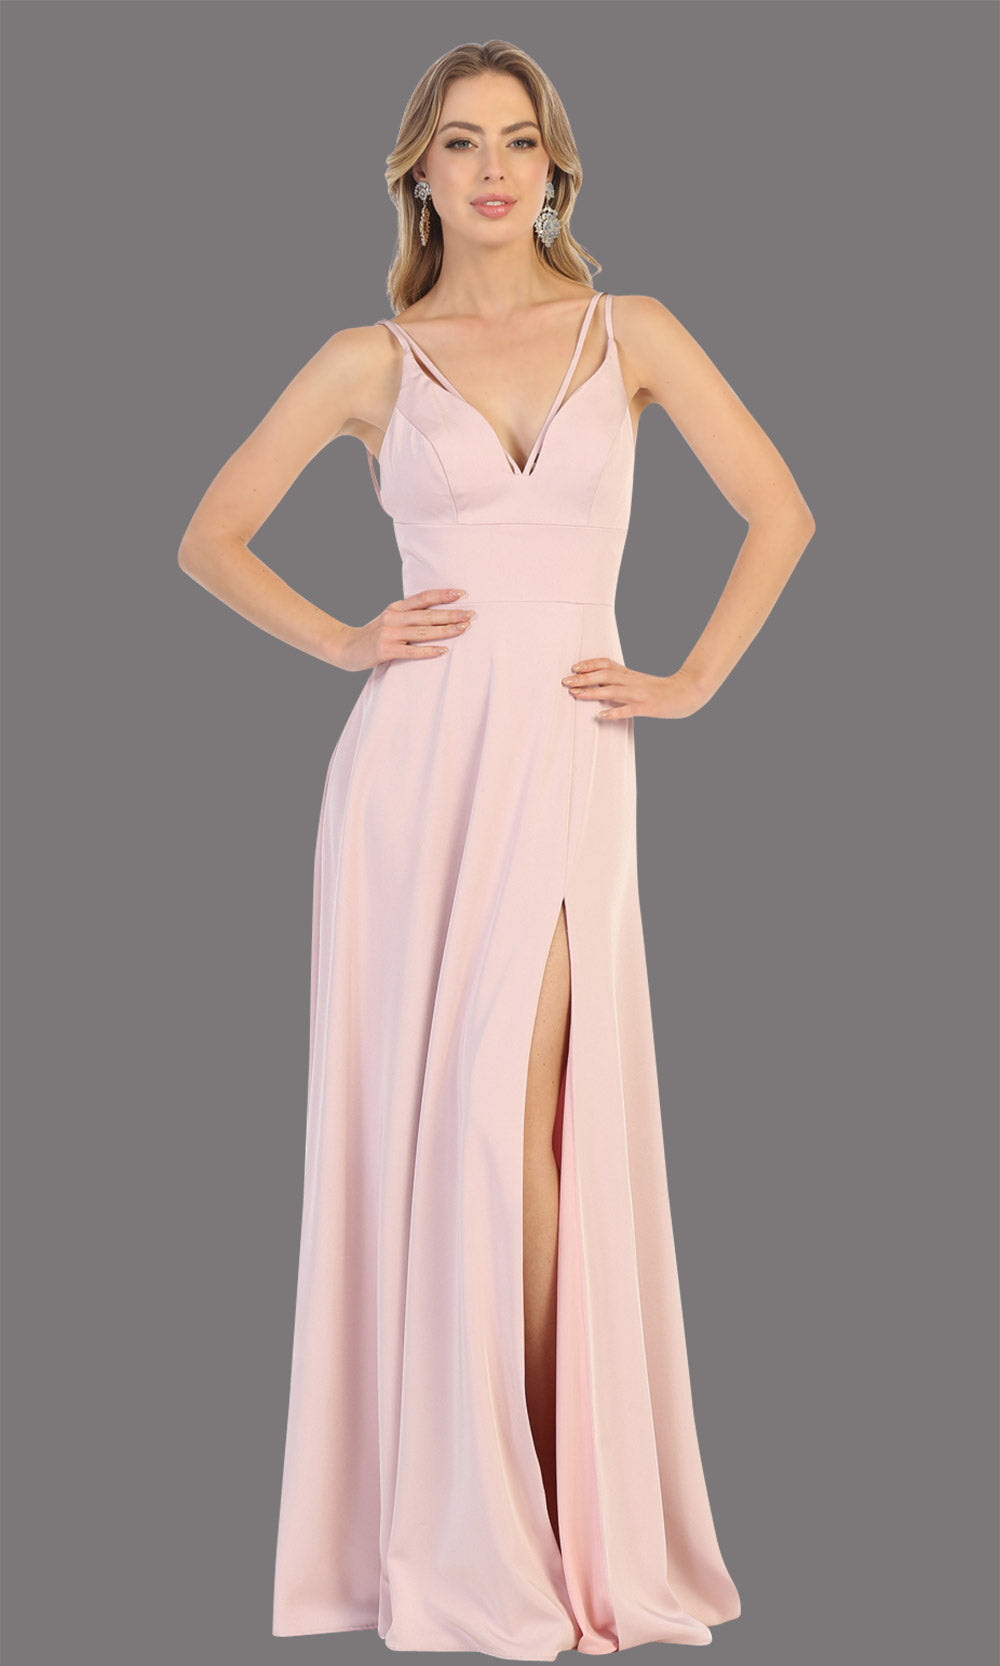 Mayqueen MQ1704 long dusty rose flowy satin dress with high slit and straps. This light pink dress is perfect for bridesmaid dresses, simple wedding guest dress, prom dress, gala, black tie wedding. Plus sizes are available, evening party dress